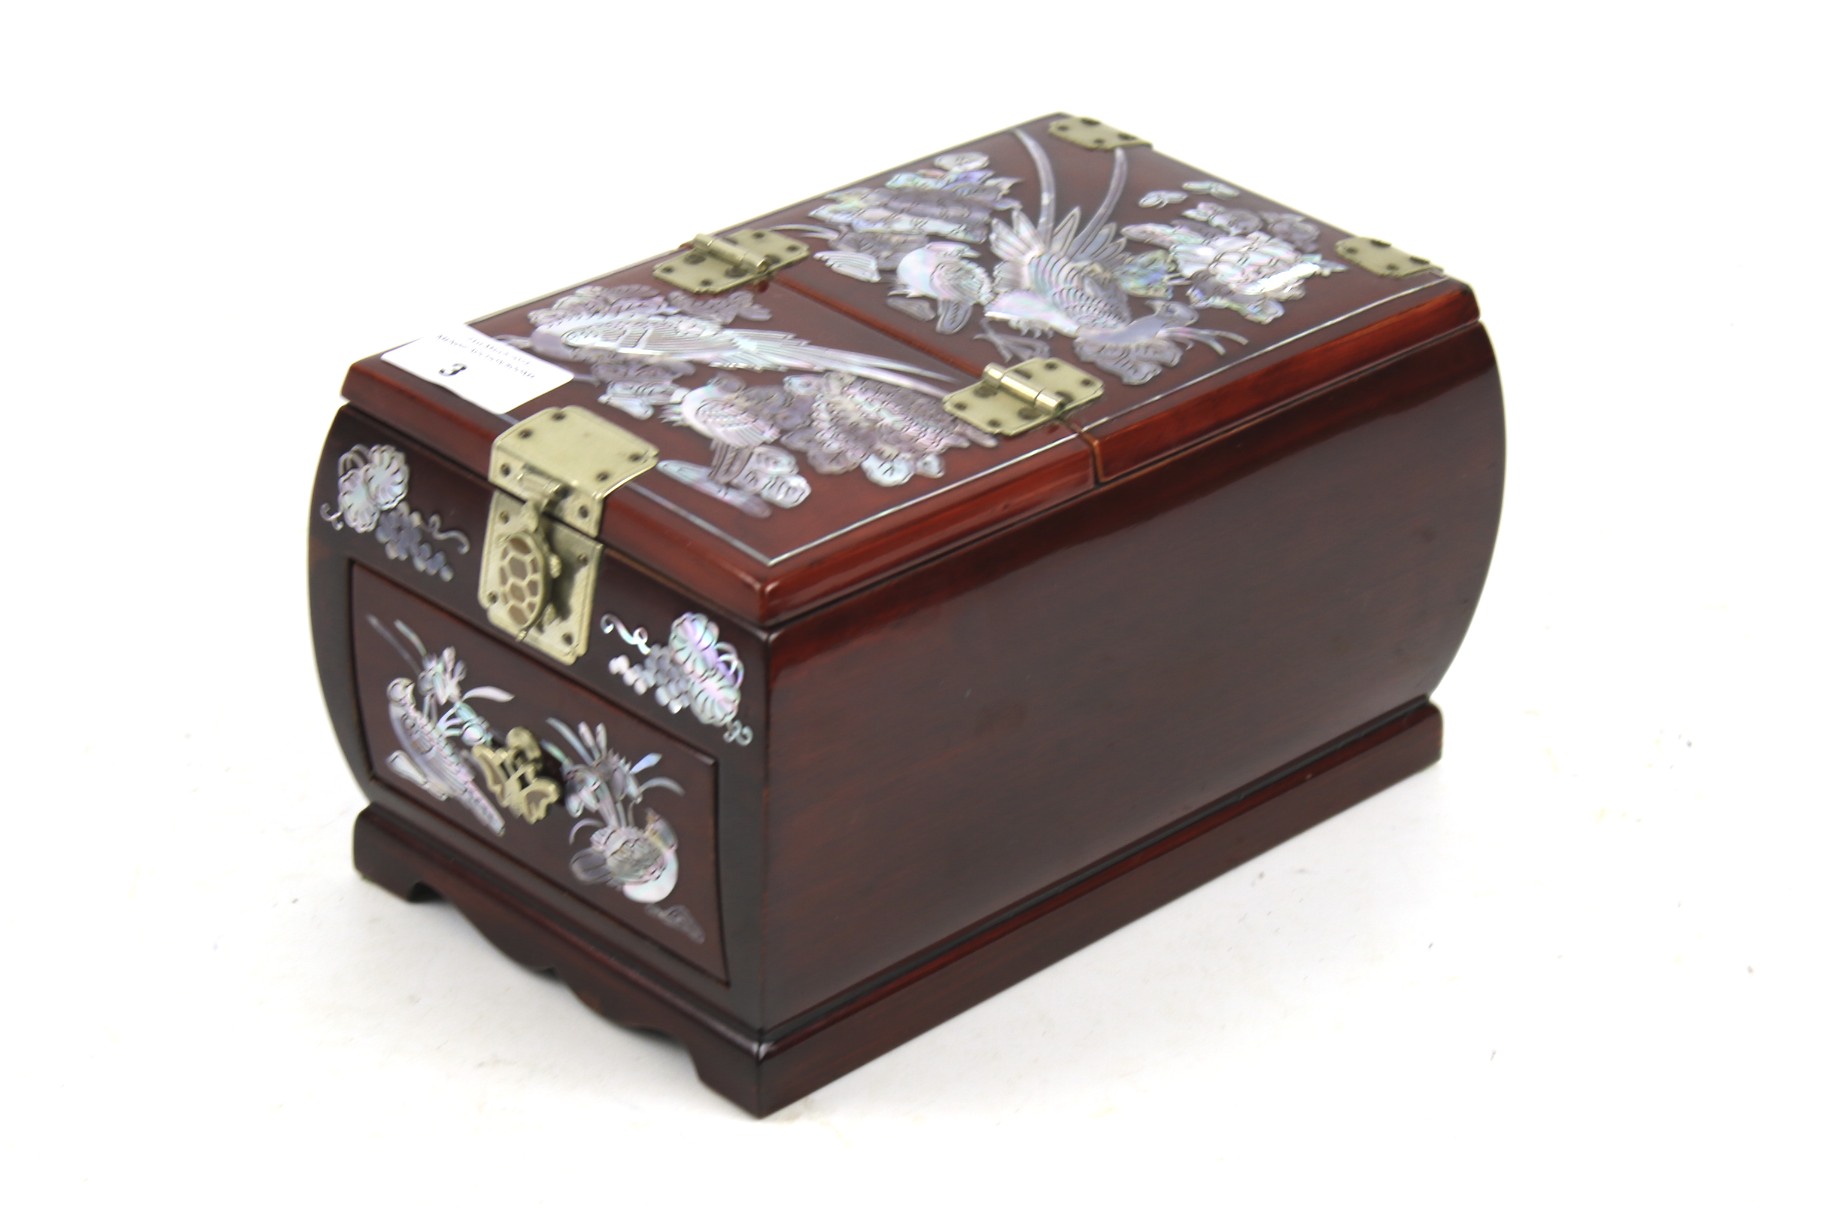 Oriental style jewellery box. Inlaid with decoration compartment contains mirror on top of drawer.